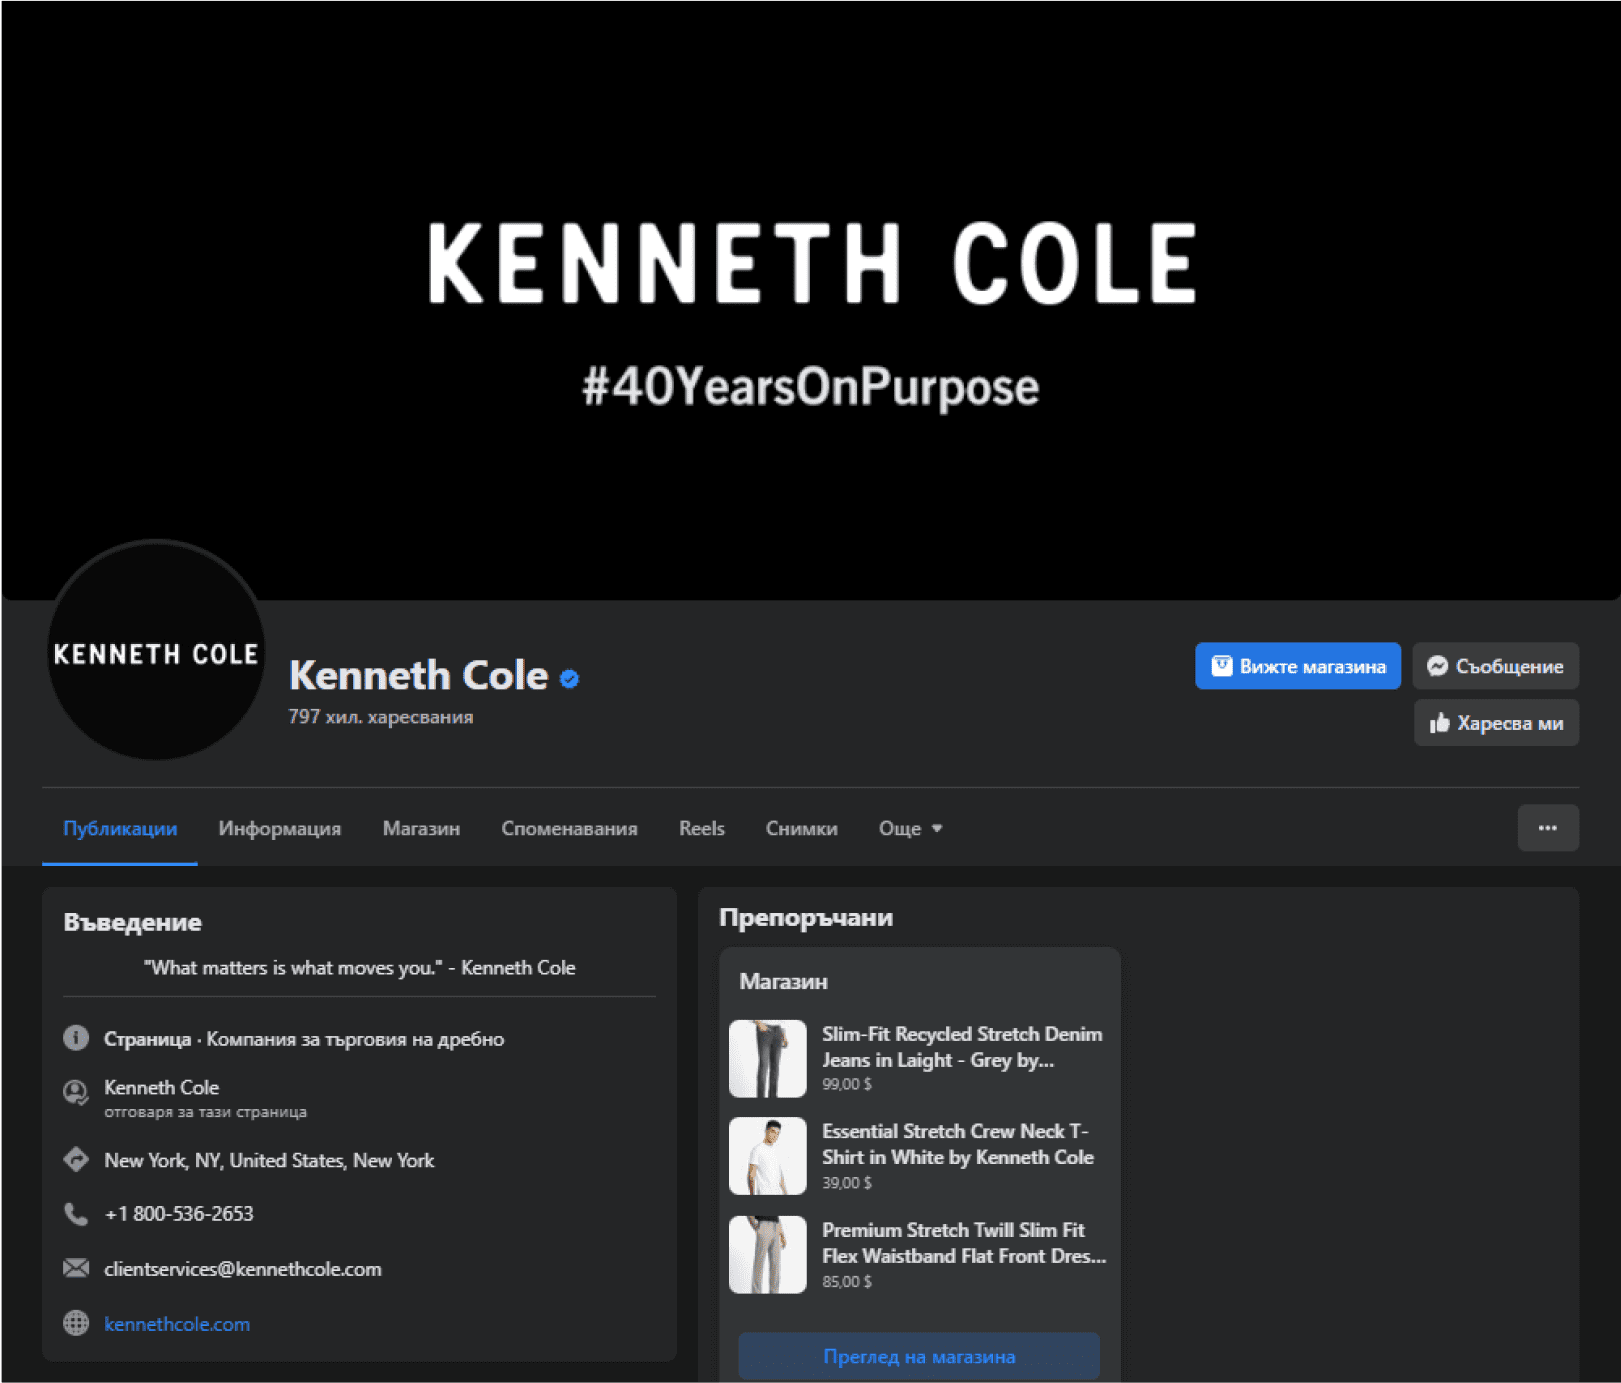 Kenneth Cole's Facebook campaign image for #40YearsOnPurpose, celebrating the brand's anniversary with a call to action for fan engagement and storytelling.